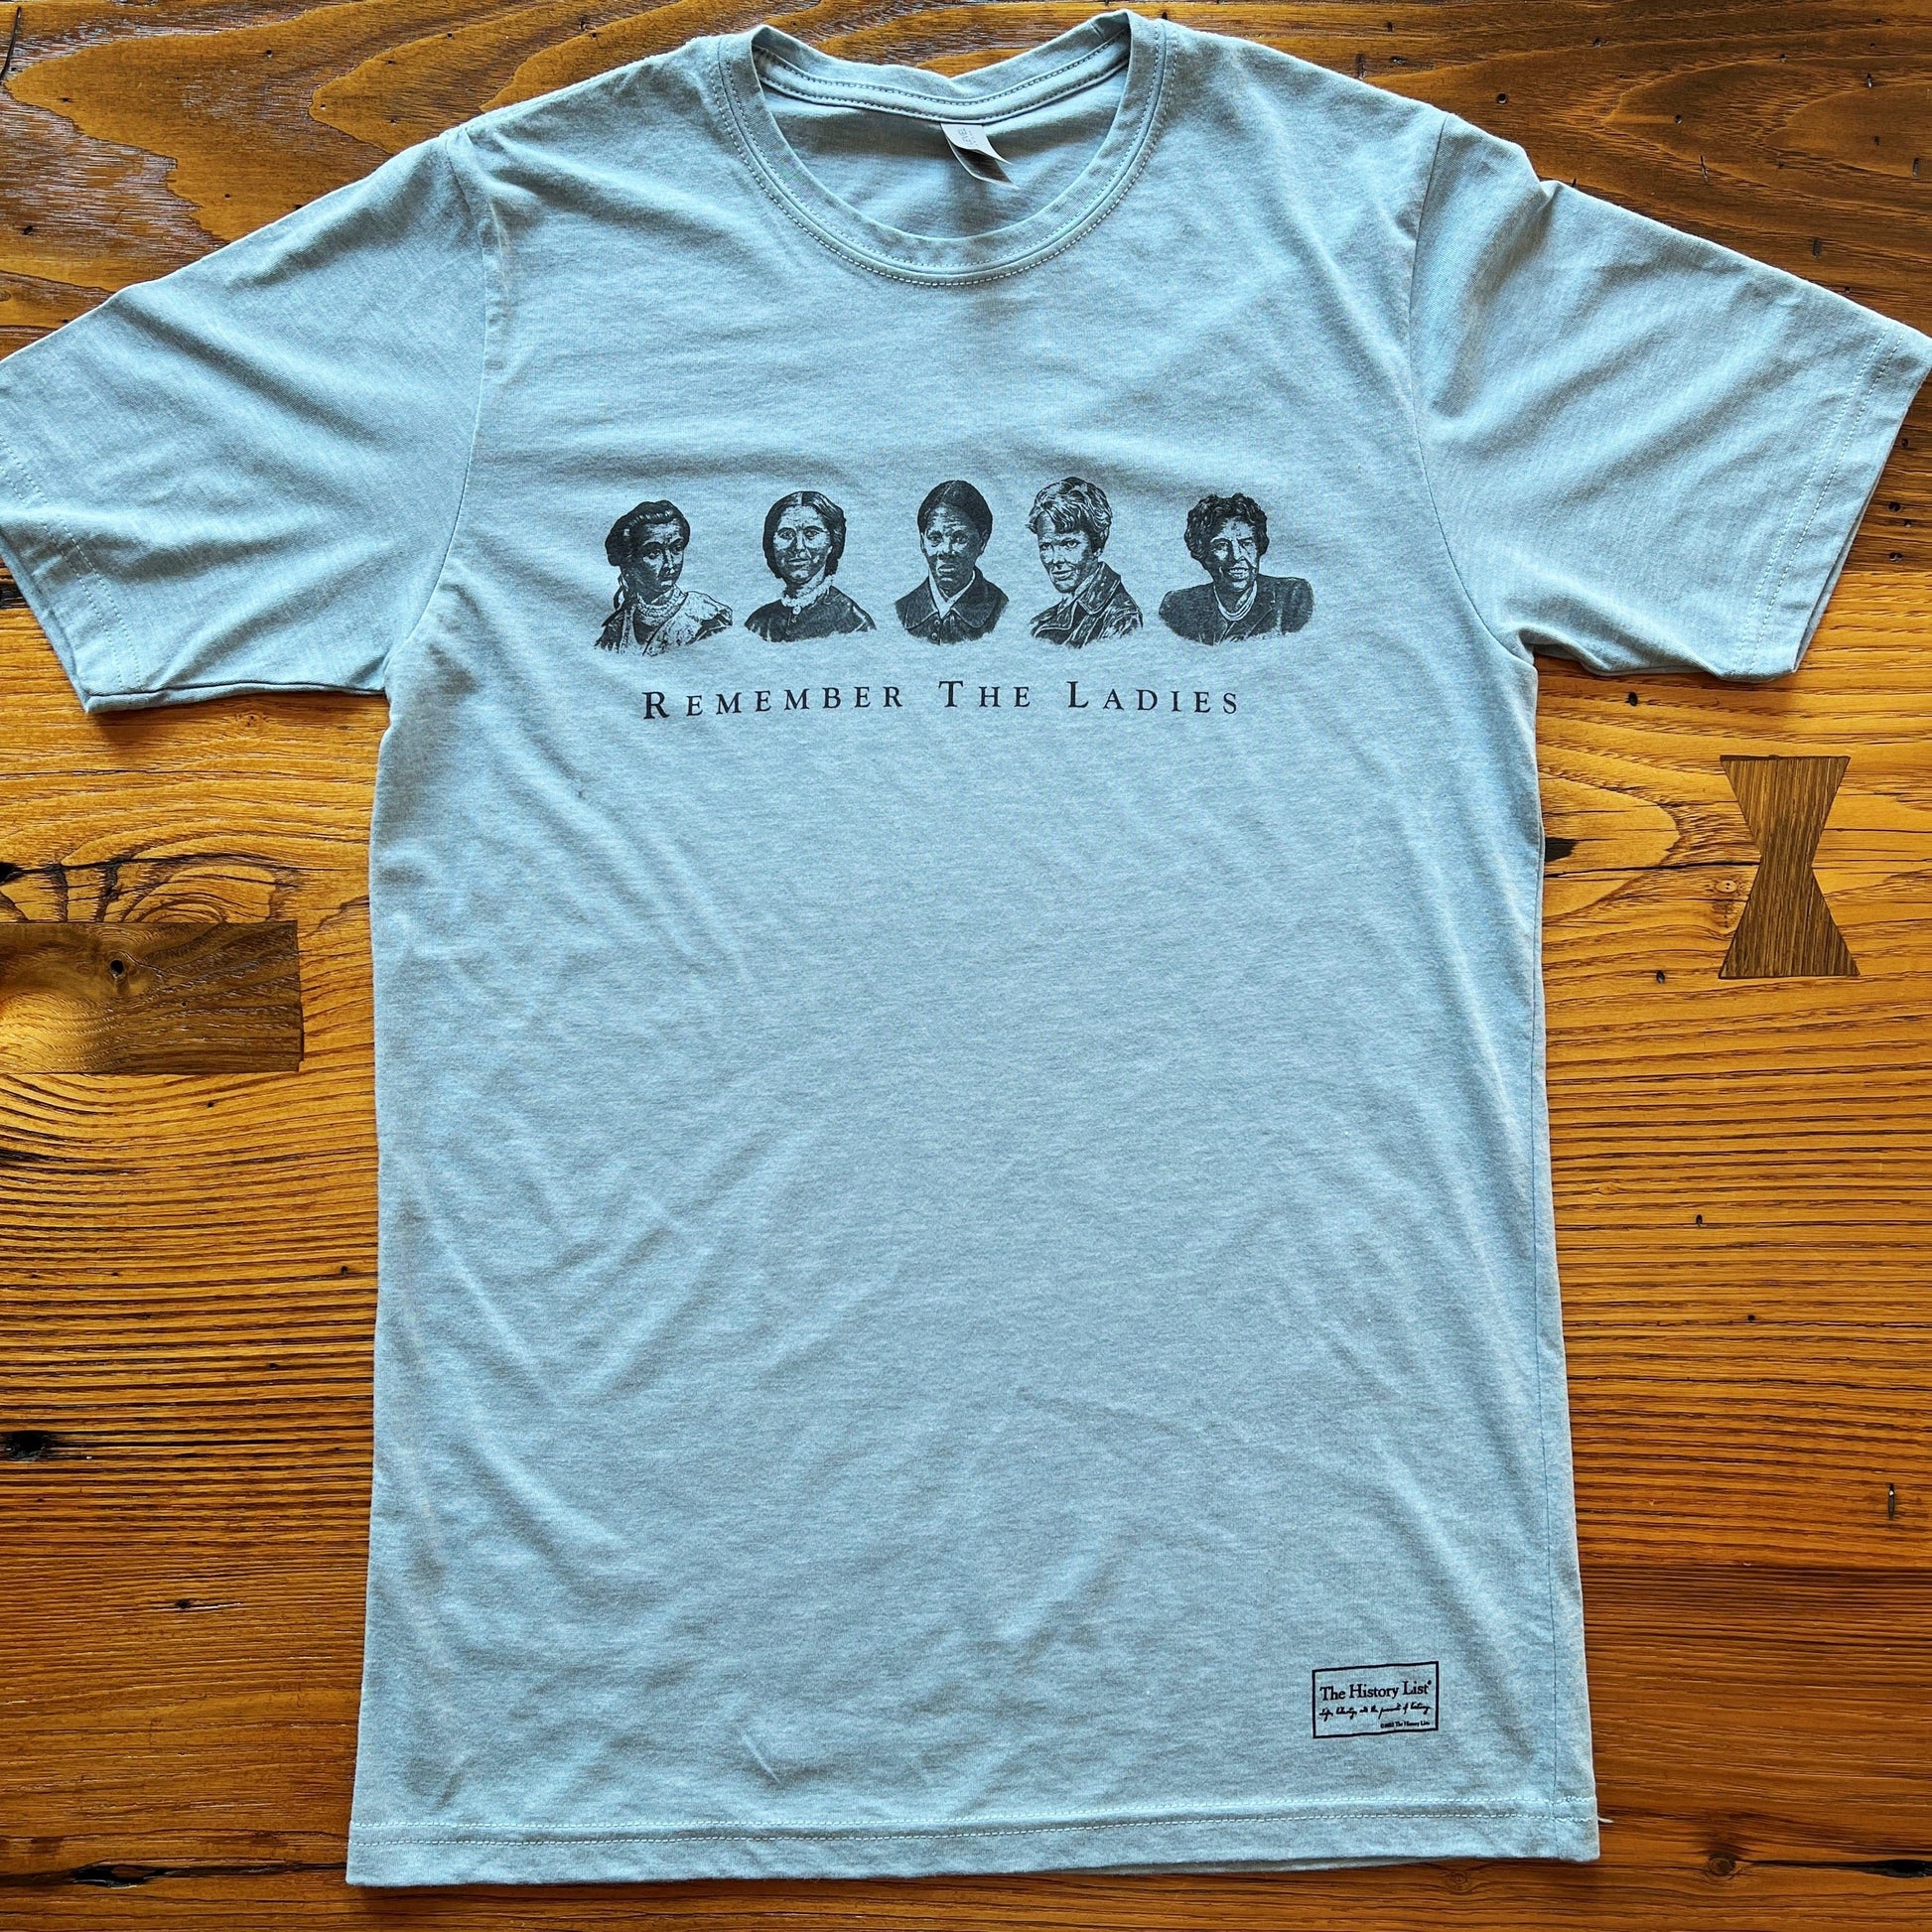 "Remember the Ladies" Shirt — Straight design from The History List Store in Light blue heather